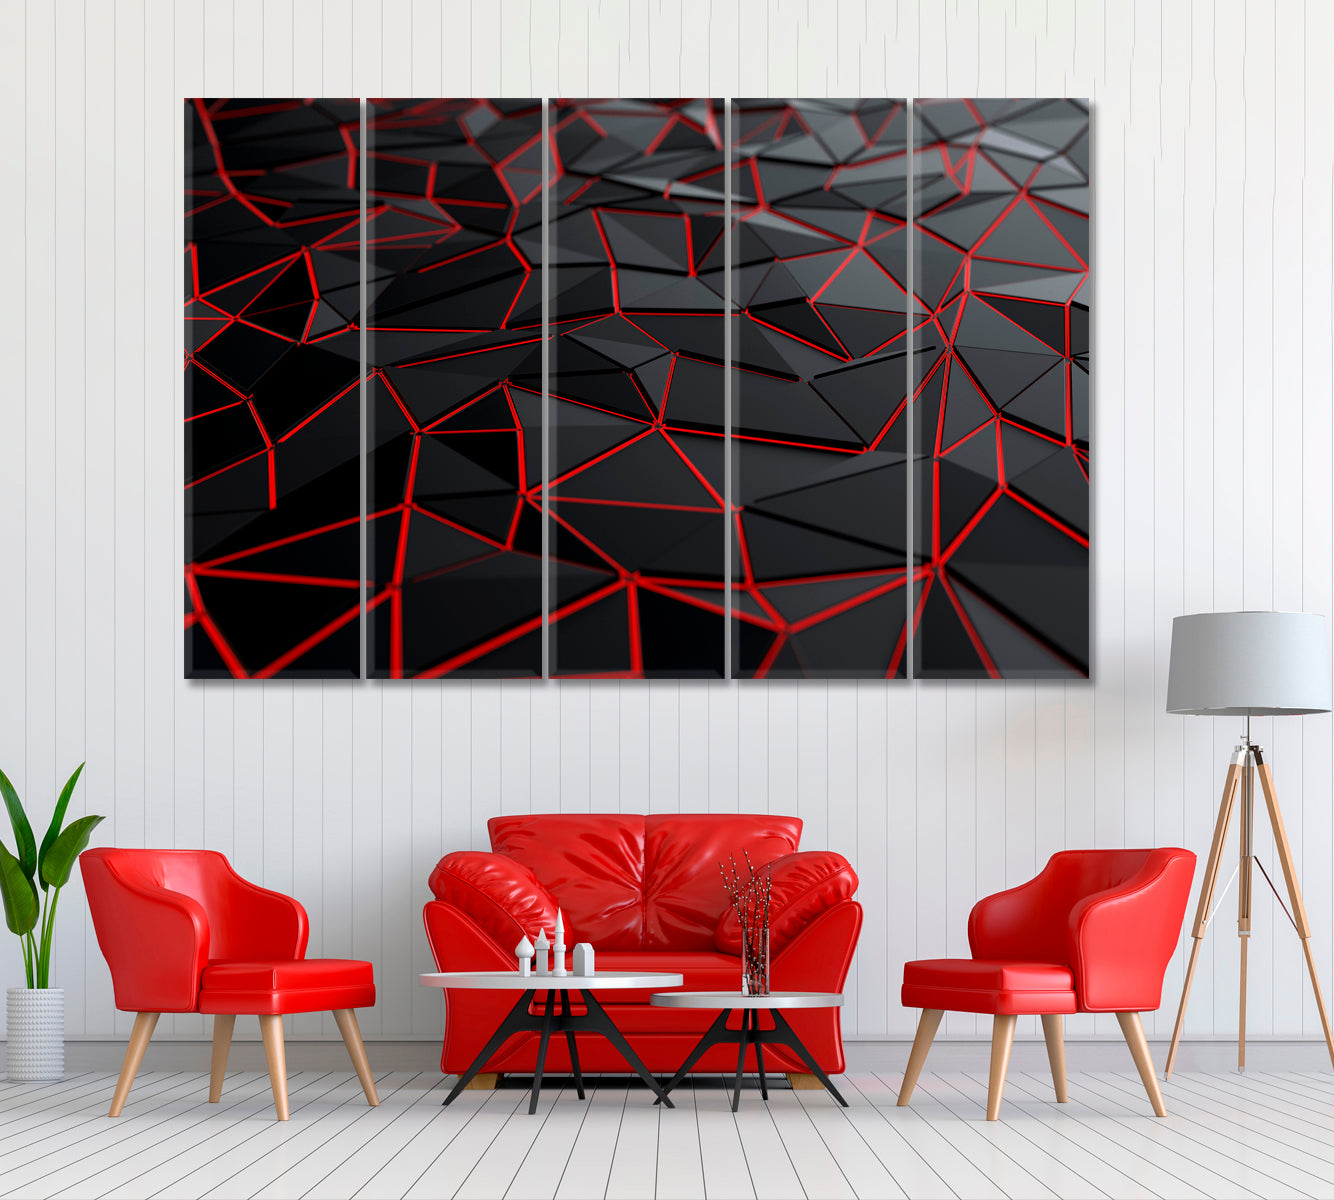 Abstract Triangles with Red Backlight Canvas Print ArtLexy 5 Panels 36"x24" inches 